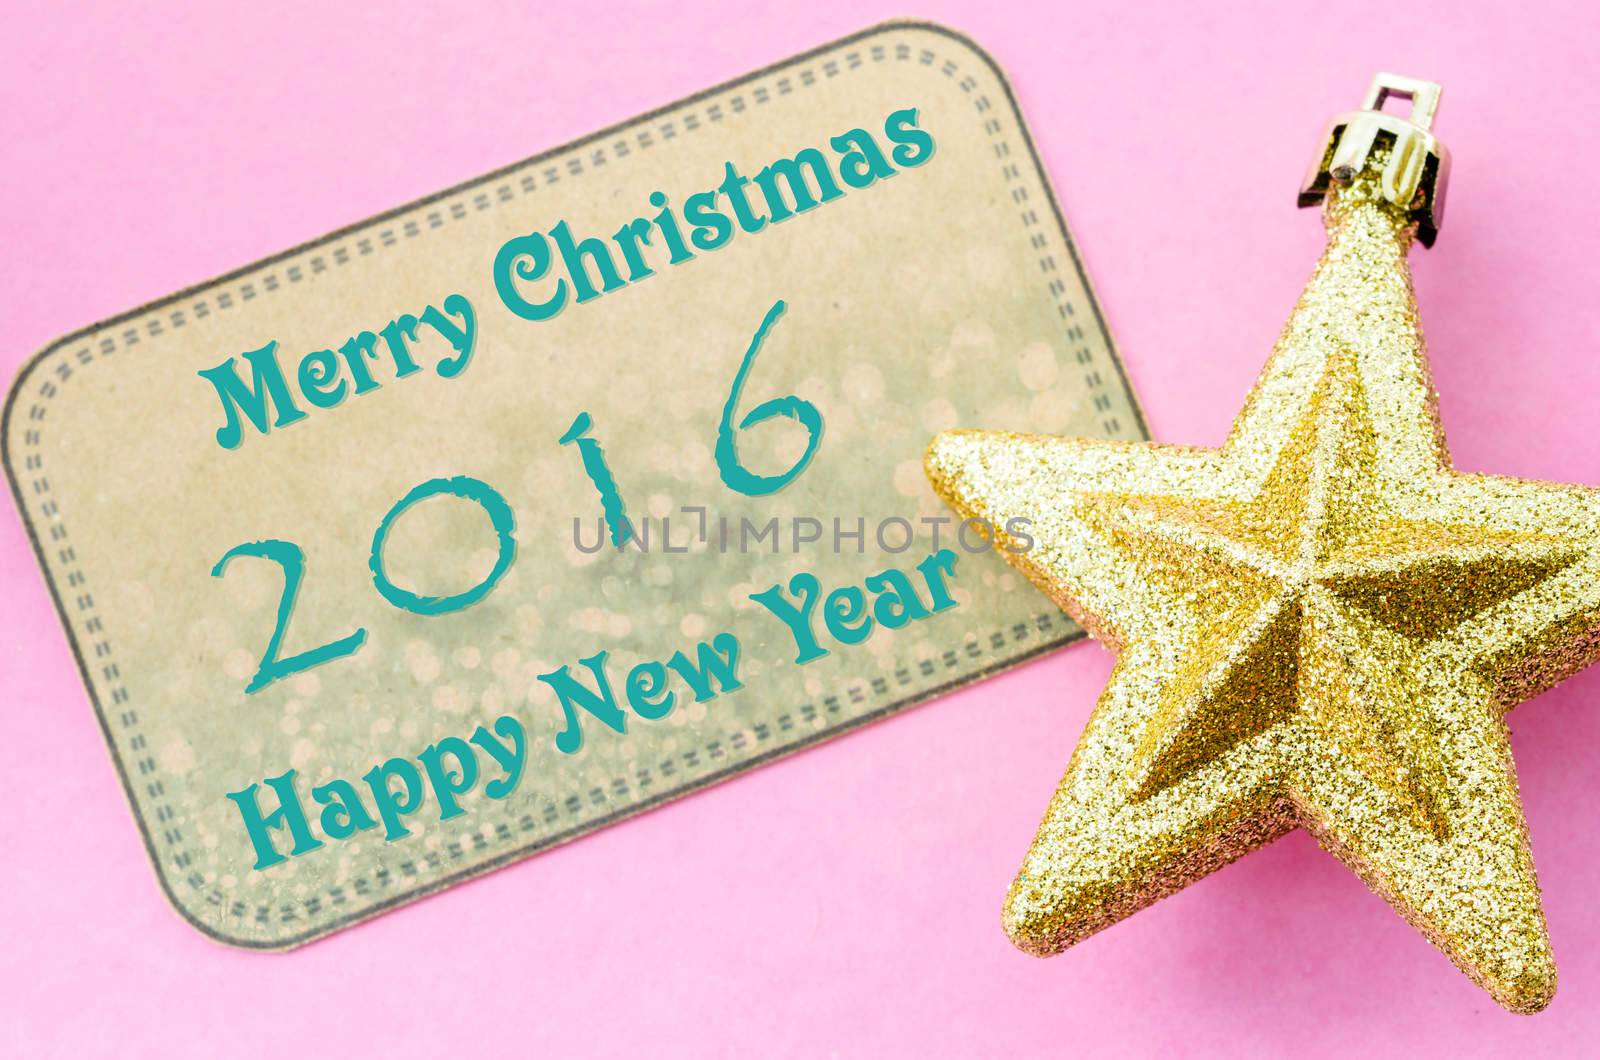 merry christmas & happy new year card 2016